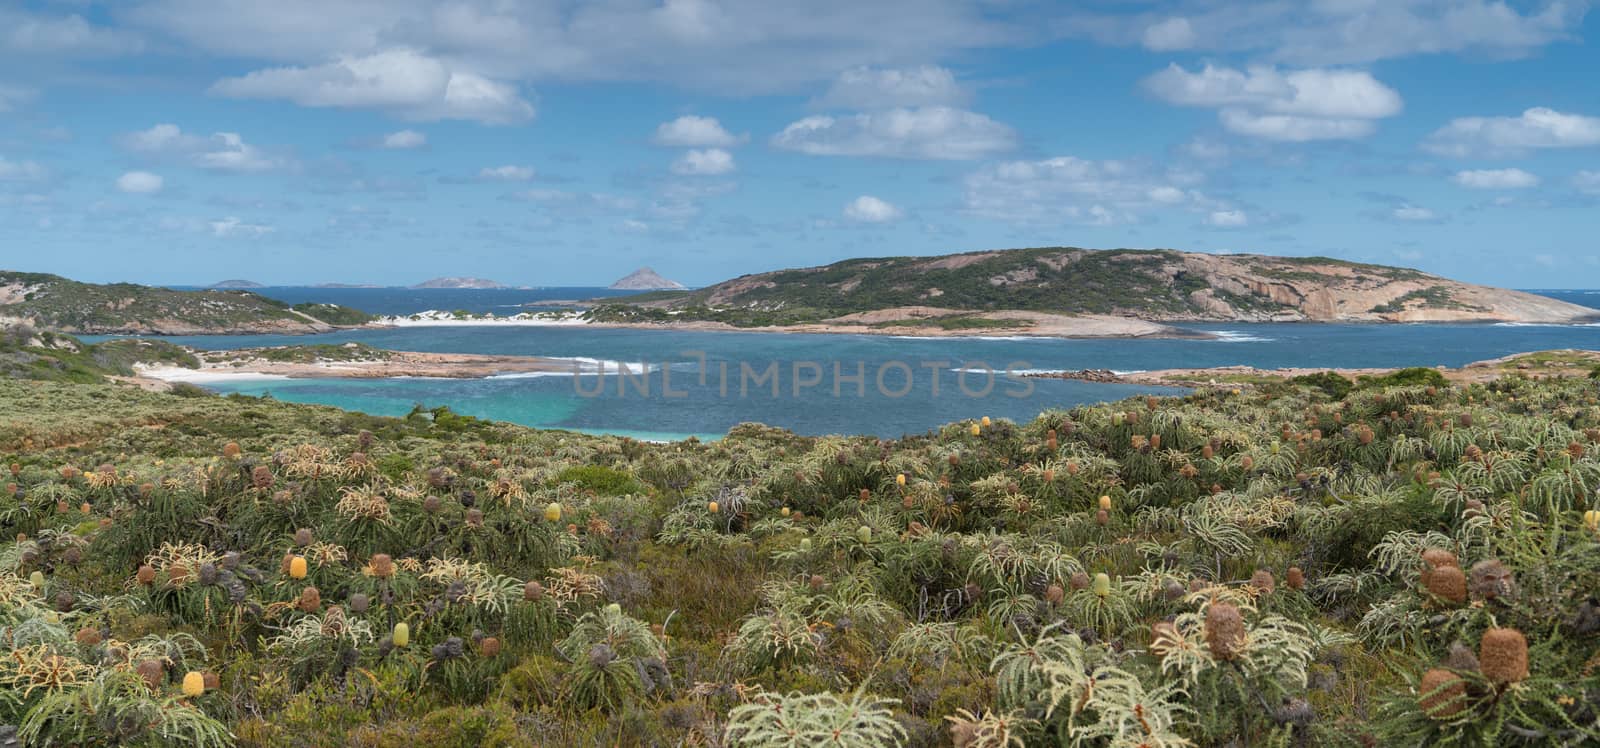 Panoramic view over the Little Wharton Beach on a summer day, one of the most beautiful places in the Cape Le Grand National Park, Western Australia